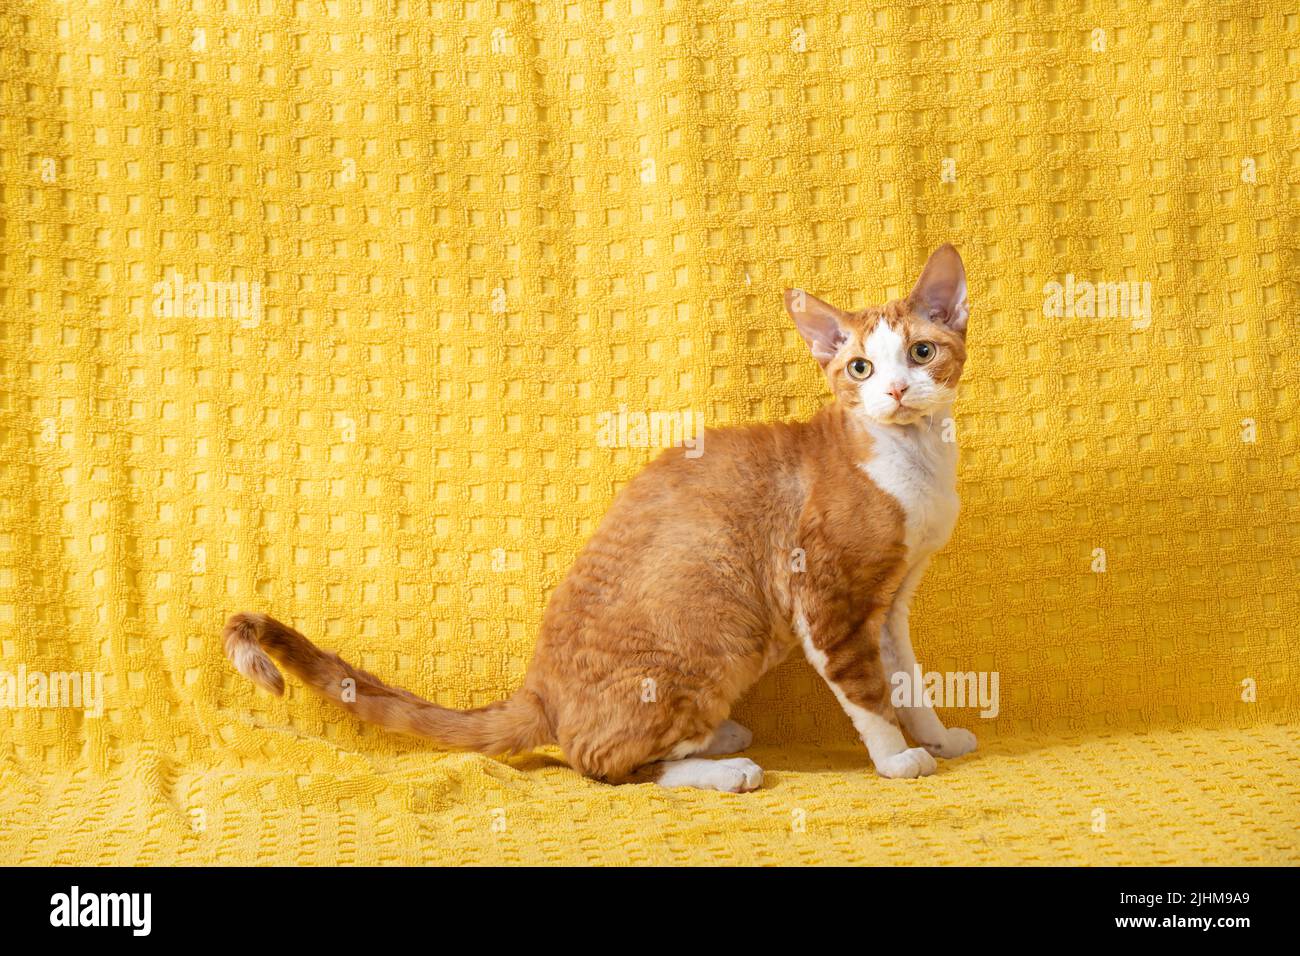 Red Devon Rex Cat Posing On Plaid. Short-haired Cat Of English Breed On Yellow Plaid Background. Shorthair Pet. Stock Photo